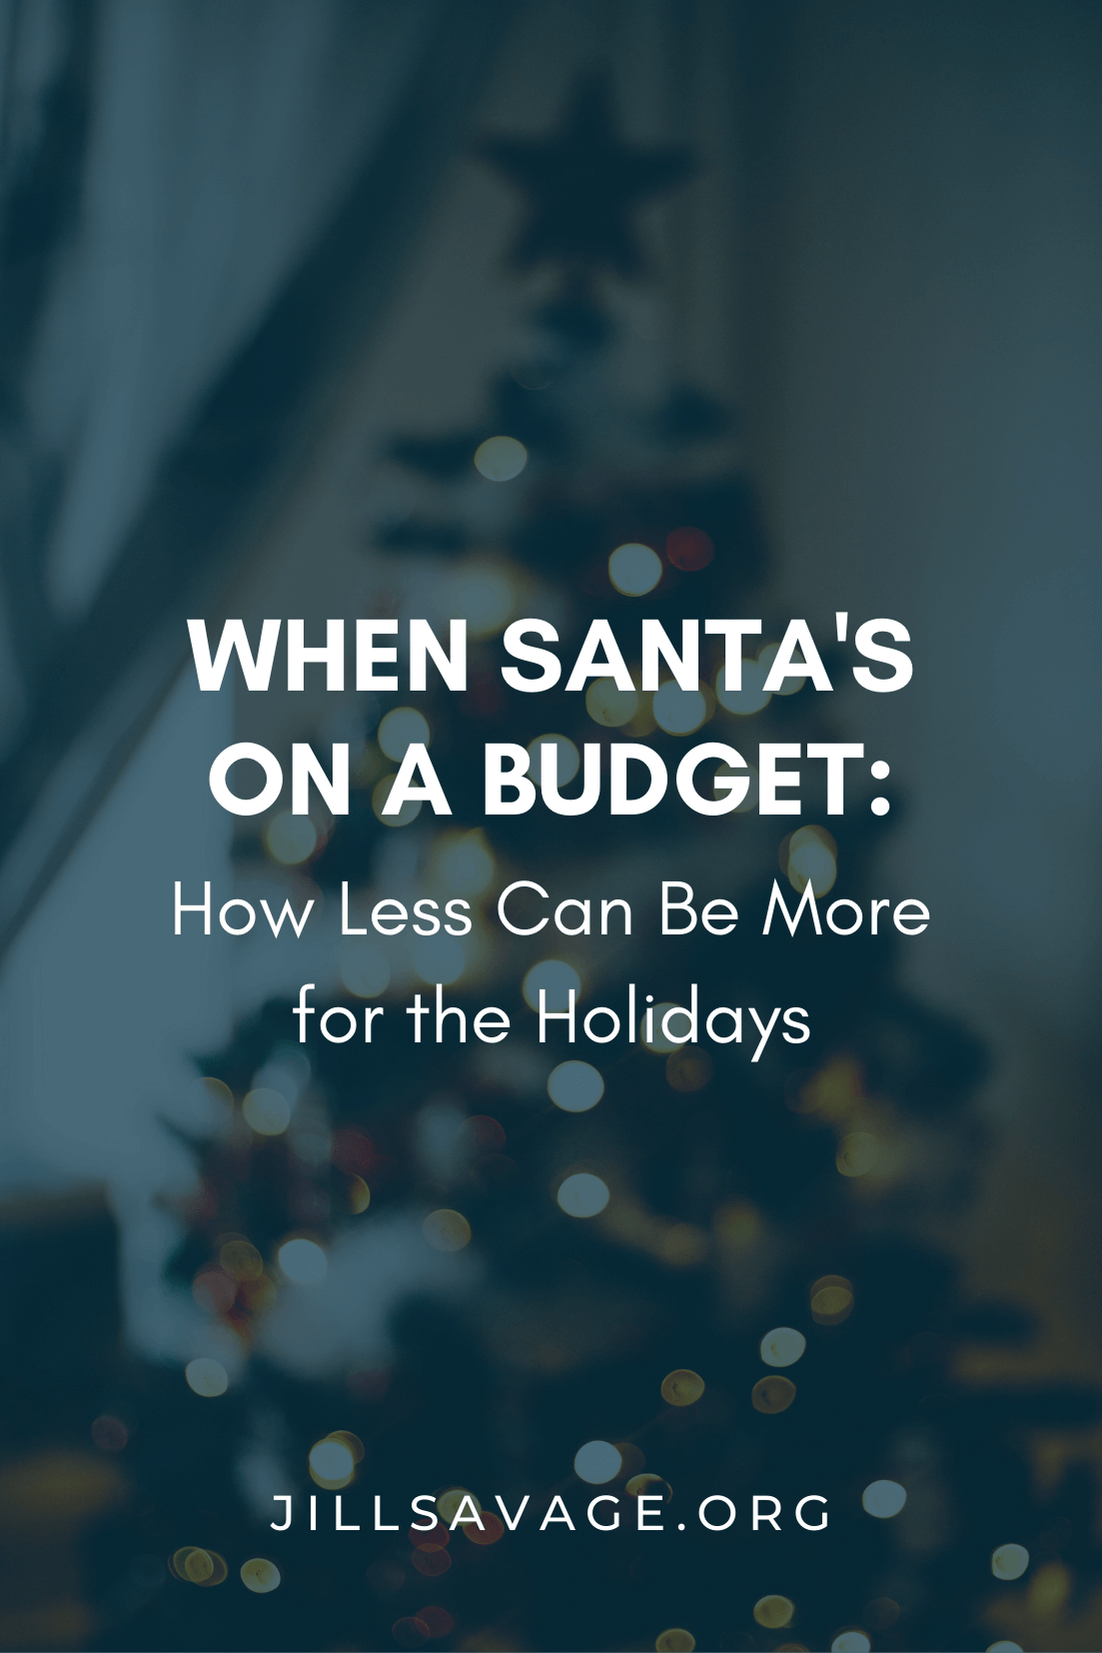 Santa’s on a Budget: How Less Can Be More for the Holidays